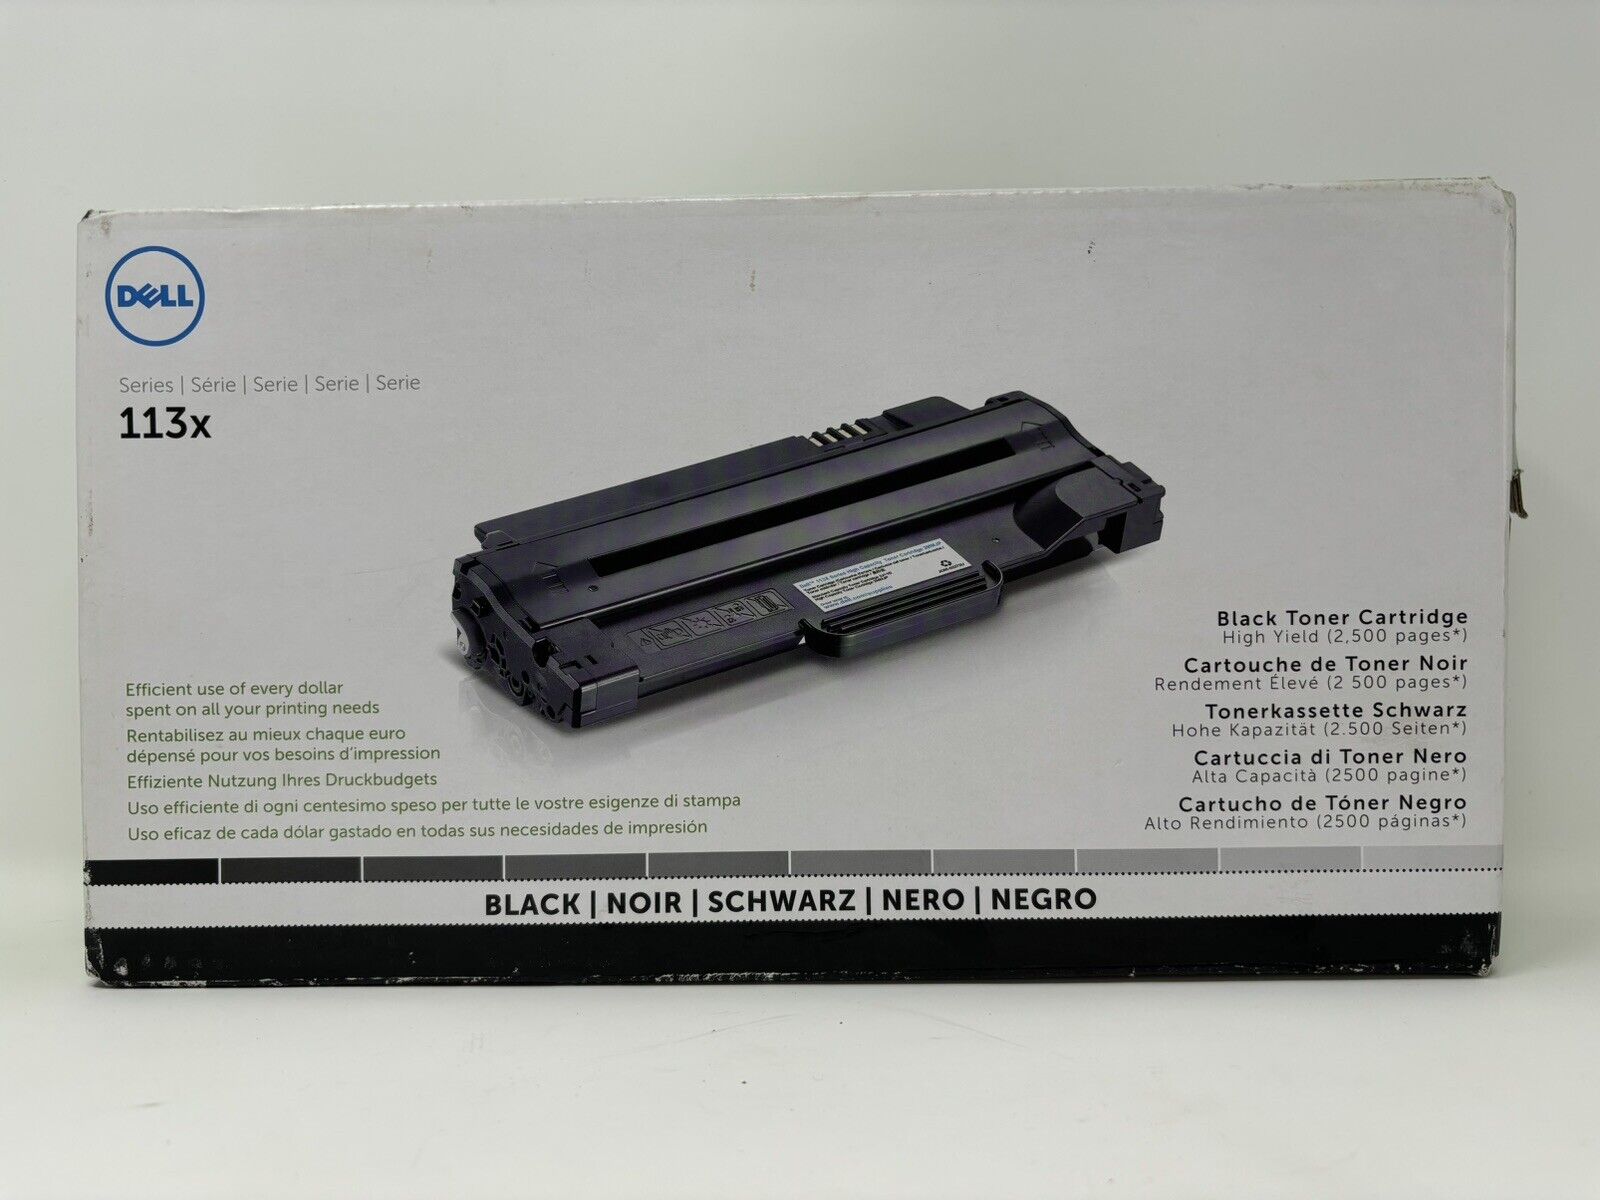 New Genuine Sealed Dell 113X Series Black High Yield Toner 2,500 Pages